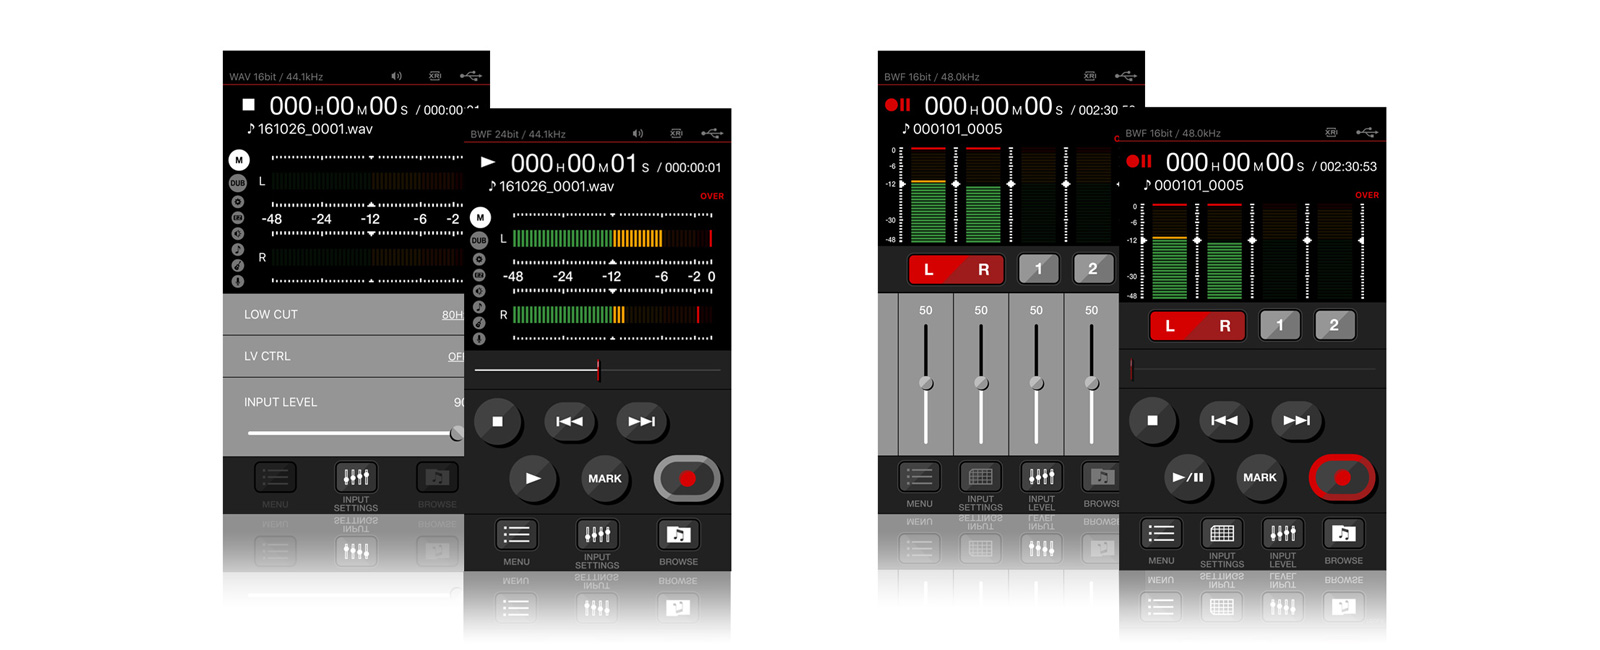 TASCAM DR CONTROL for Android - New Upgraded Version 2.2.1 of Software Released